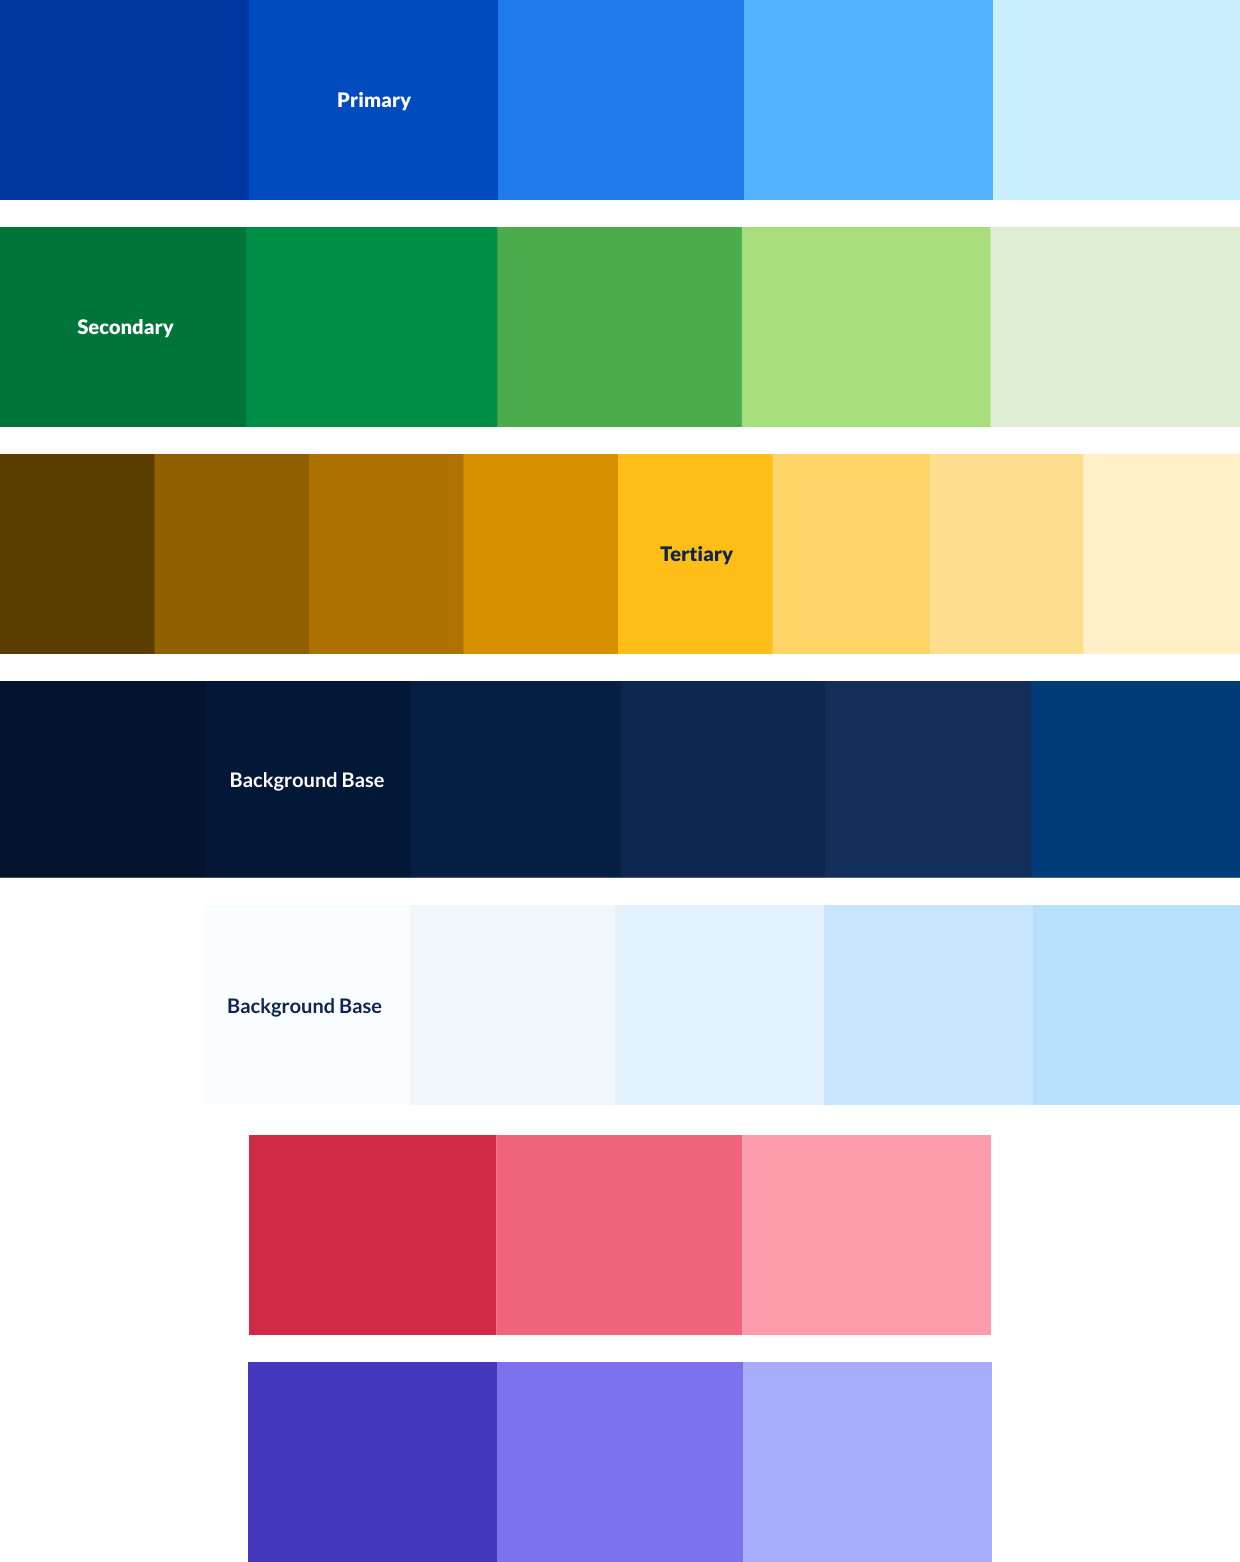 The enhanced color scales for the website.